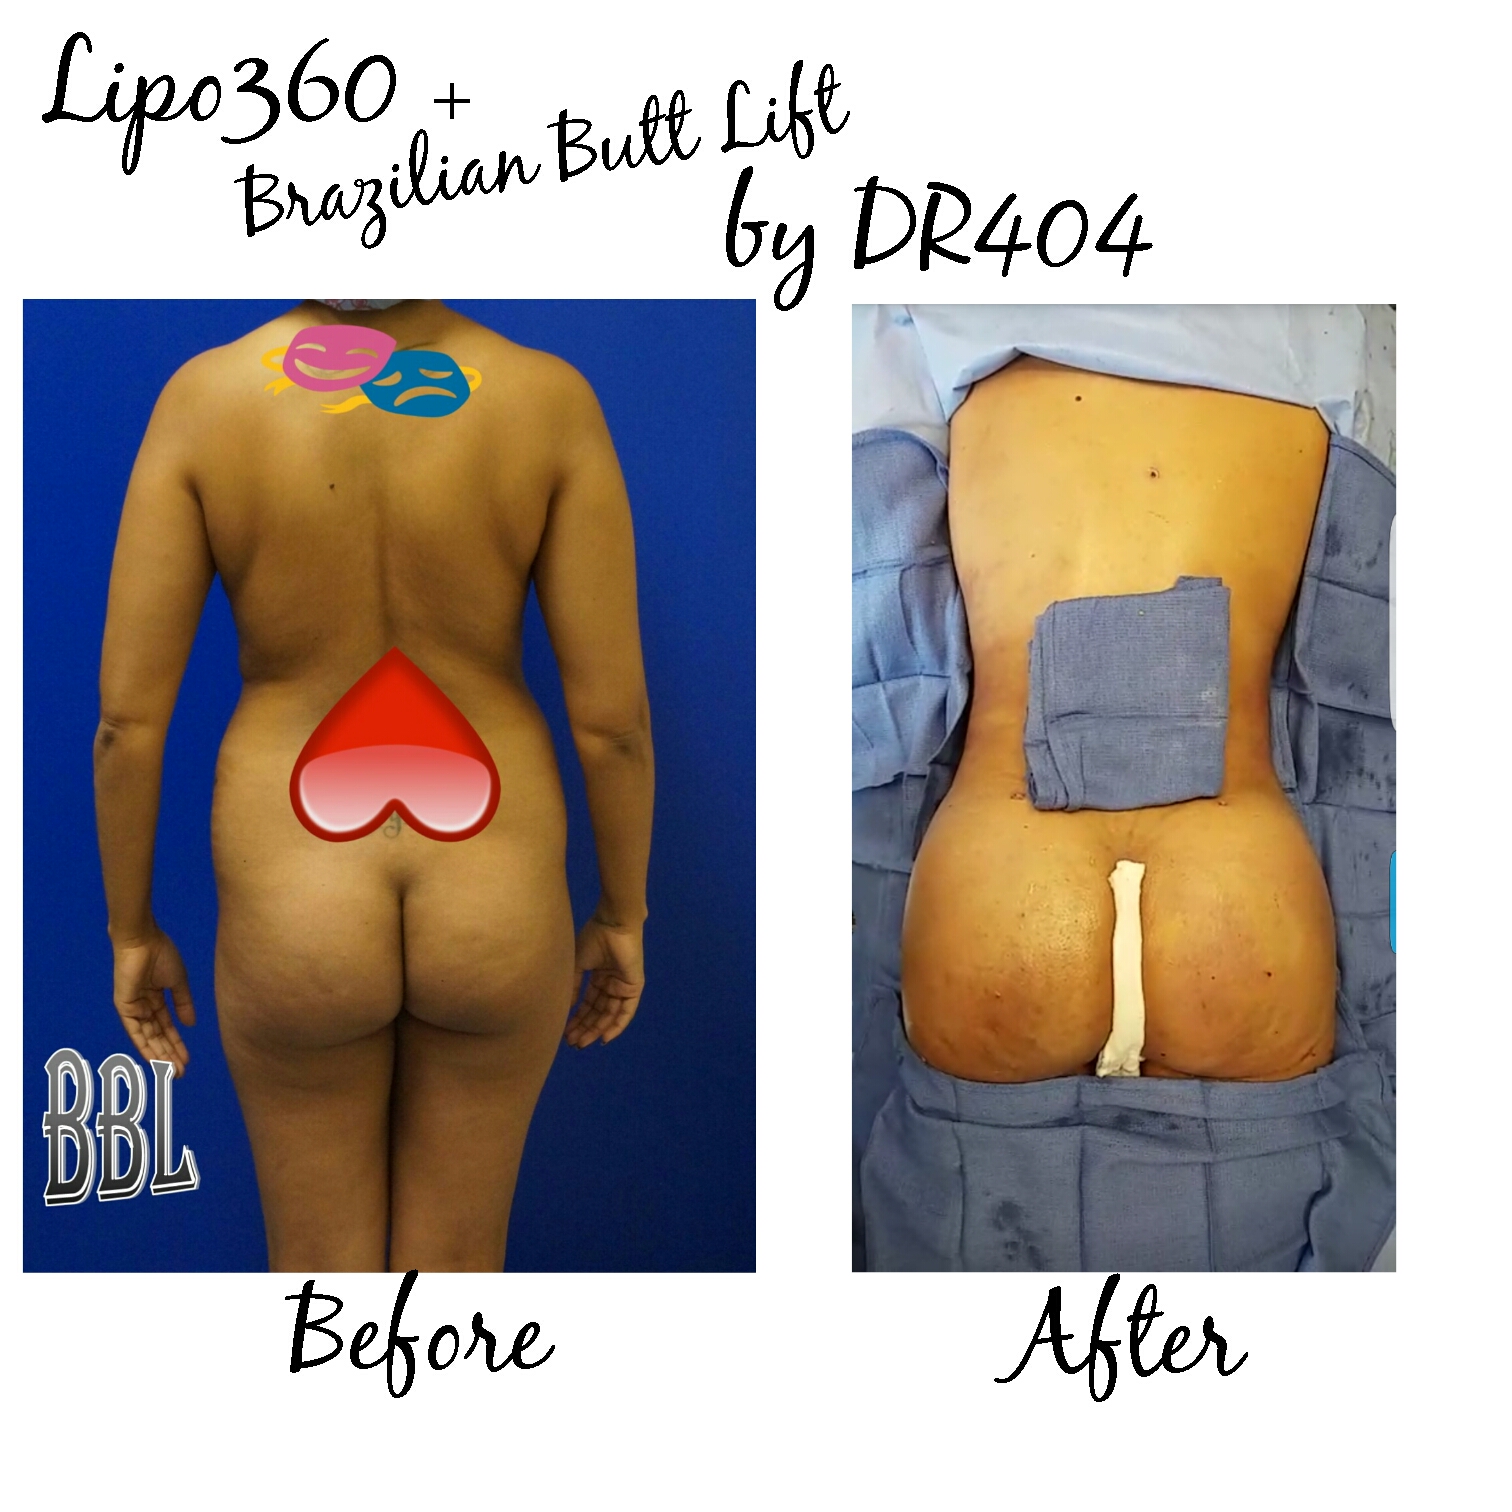 Brazilian Butt Lift with Threads, Brazilian Butt Lift (BBL) utilizes liposuction plastic surgery performed by our liposuction surgeon. Liposuction is performed using tumescent anesthesia and traditional liposuction plastic surgery.  We are experts in laser liposuction (smartlipo), vaser liposuction and fat transfer, also known as fat grafting.  Brazilian butt lift atlanta has been popularized by Dr. Curves and others like therealdrmiami of snapchat fame have made Brazilian butt lifts extremely popular in recent years. Our autologous fat transfer is second to none and we utilize Platelet-Rich Plasma (PRP) which helps stabilize the fat transfer faster by promoting blood vessels to grow into the fat grafting. Most people think that a Brazilian butt lift (BBL) is a plastic surgery procedure but instead it is a cosmetic surgery procedure strictly performed for enhancement of the buttock area to transform your butt into the big Brazilian butt and replicate the popular Brazilian ass that Brazilian butt women have been getting Brazilian butt lifts to have for years.  As part of our mommy makeover packages you can combine a Brazilian ass with a tummy tuck and/or breast augmentation with a mastopexy, which is more commonly associated with a mommy makeover.